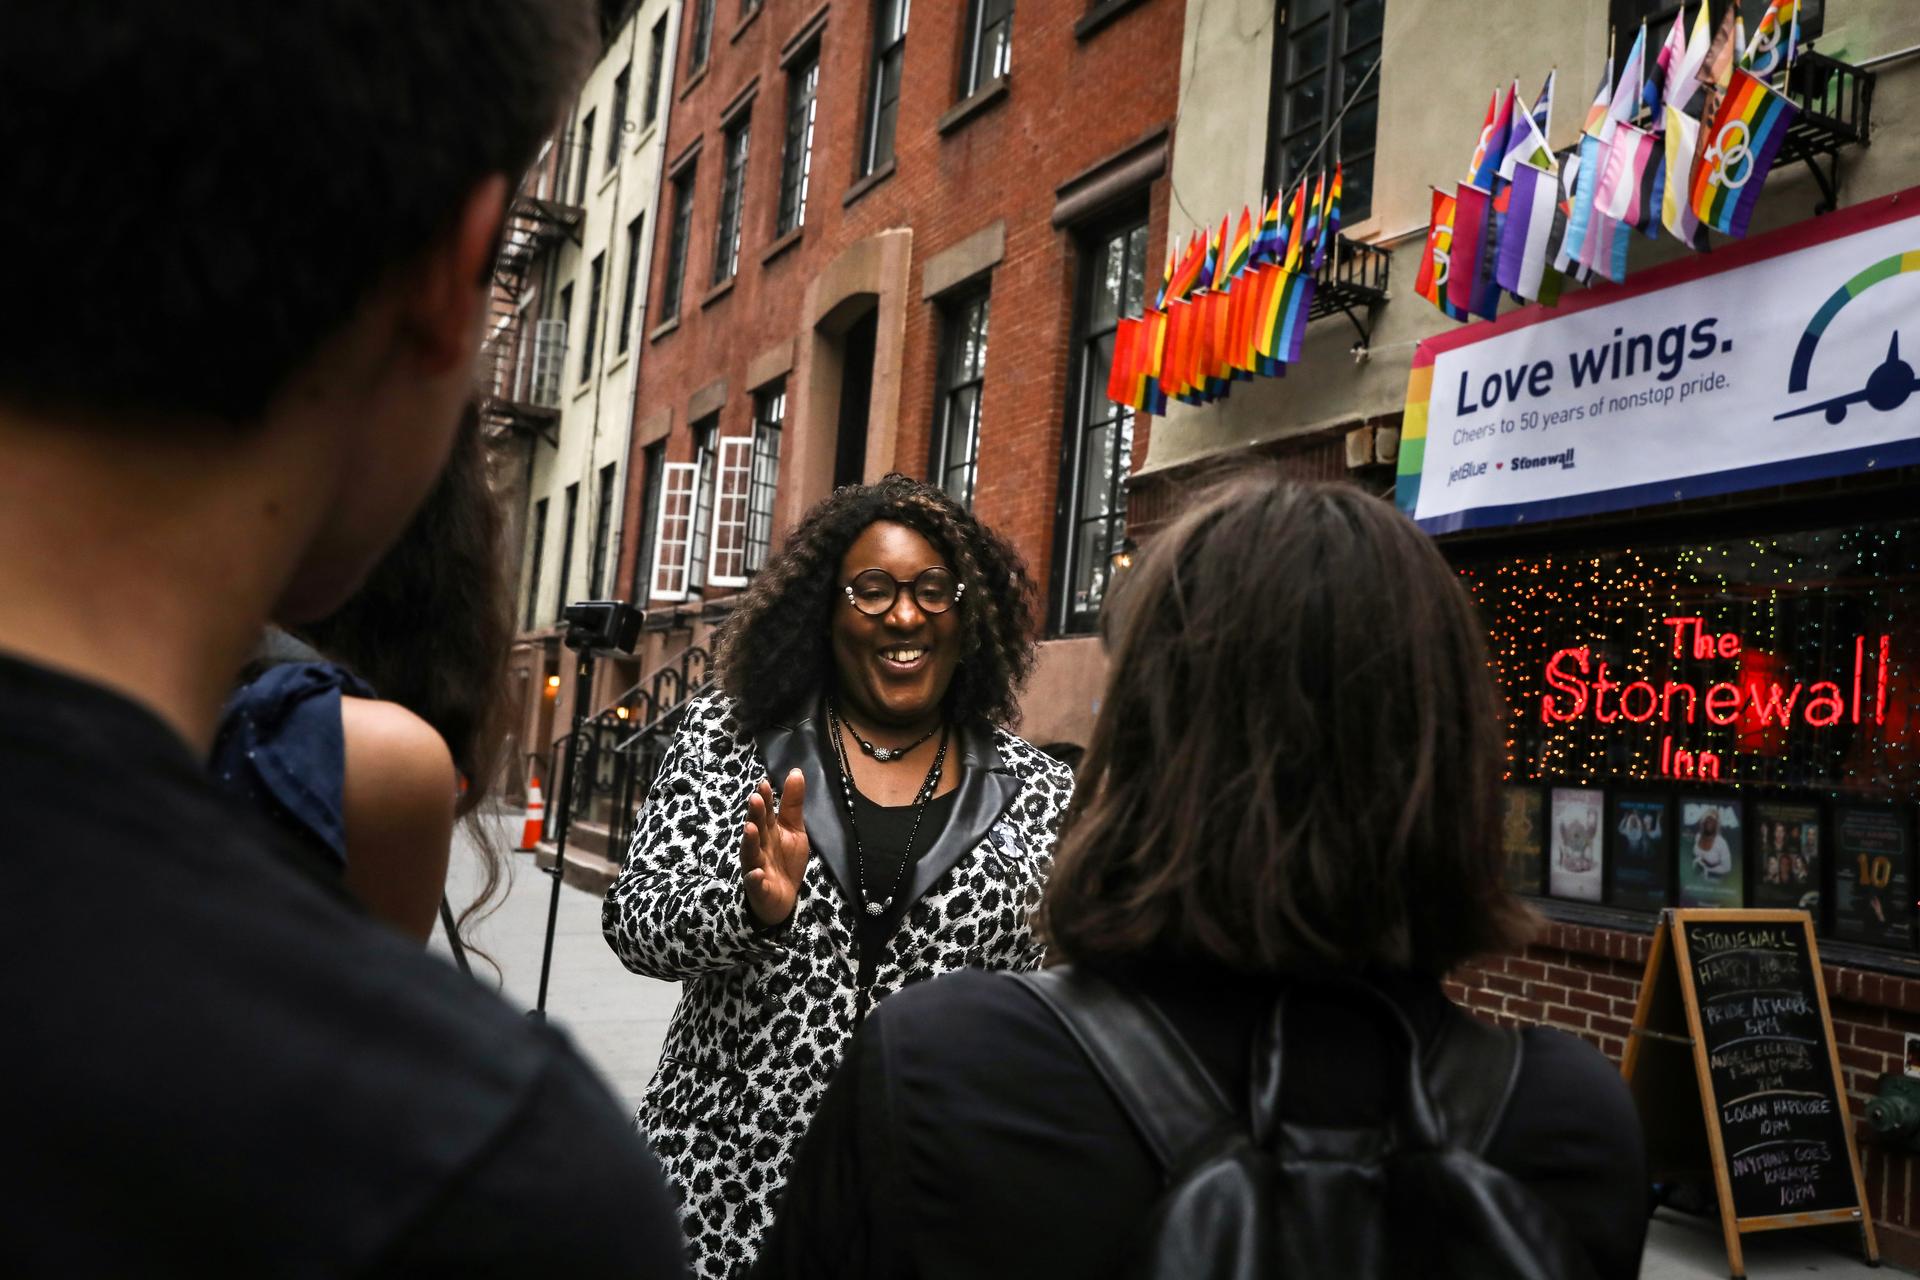 LaLa Zannell, a New York-based transgender rights activist, speaks to schoolchildren outside The Stonewall Inn in New York, U.S., May 30, 2019.